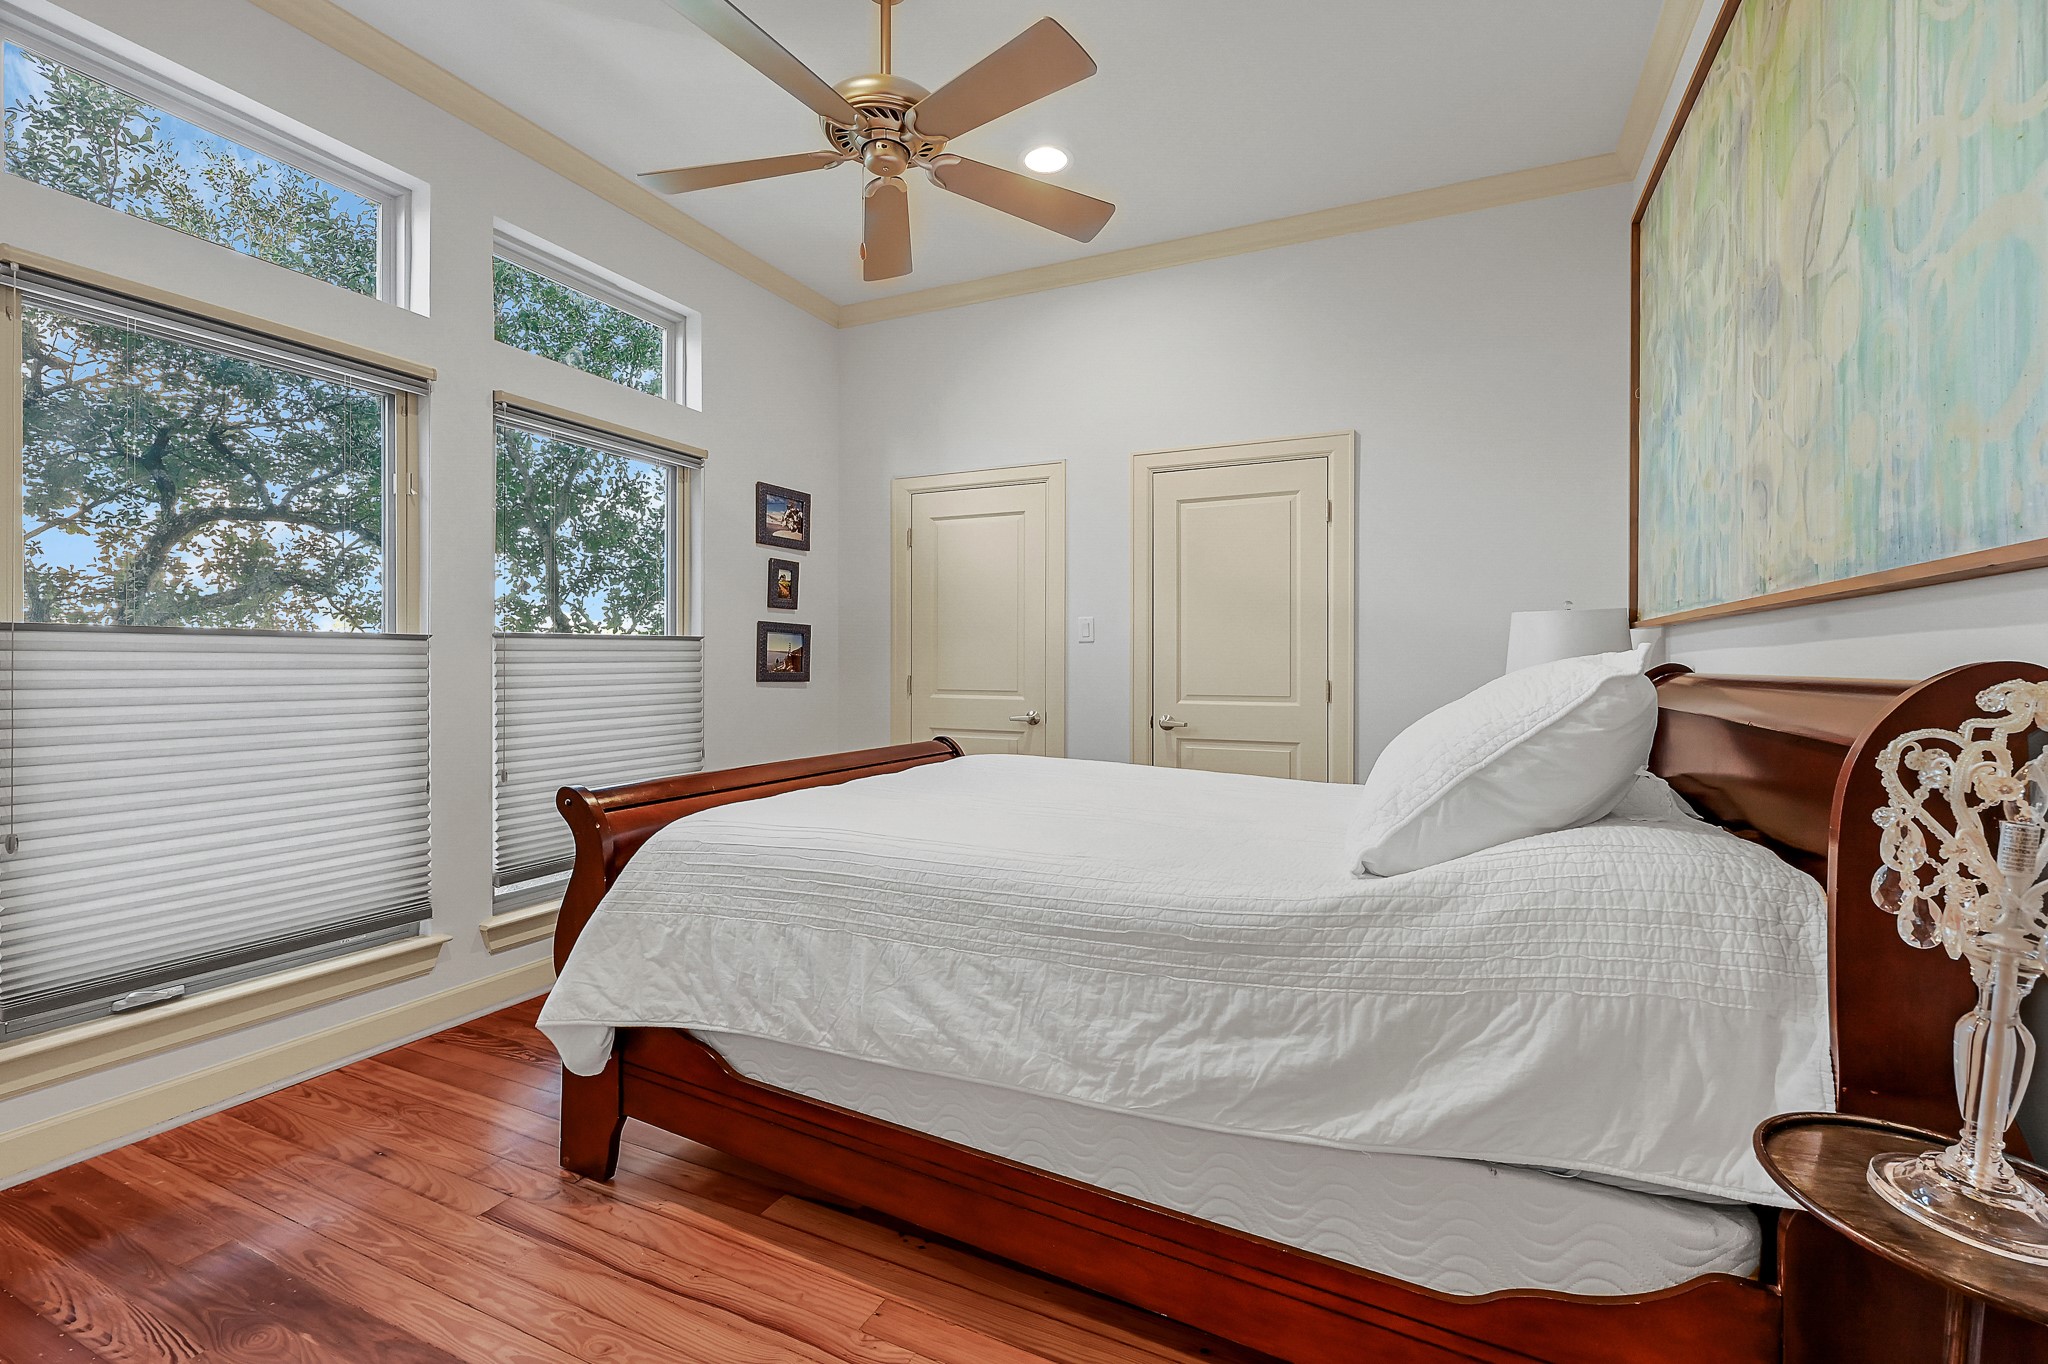 Secondary ensuite bedroom located on third floor with pine floors, high ceilings, and custom shades.